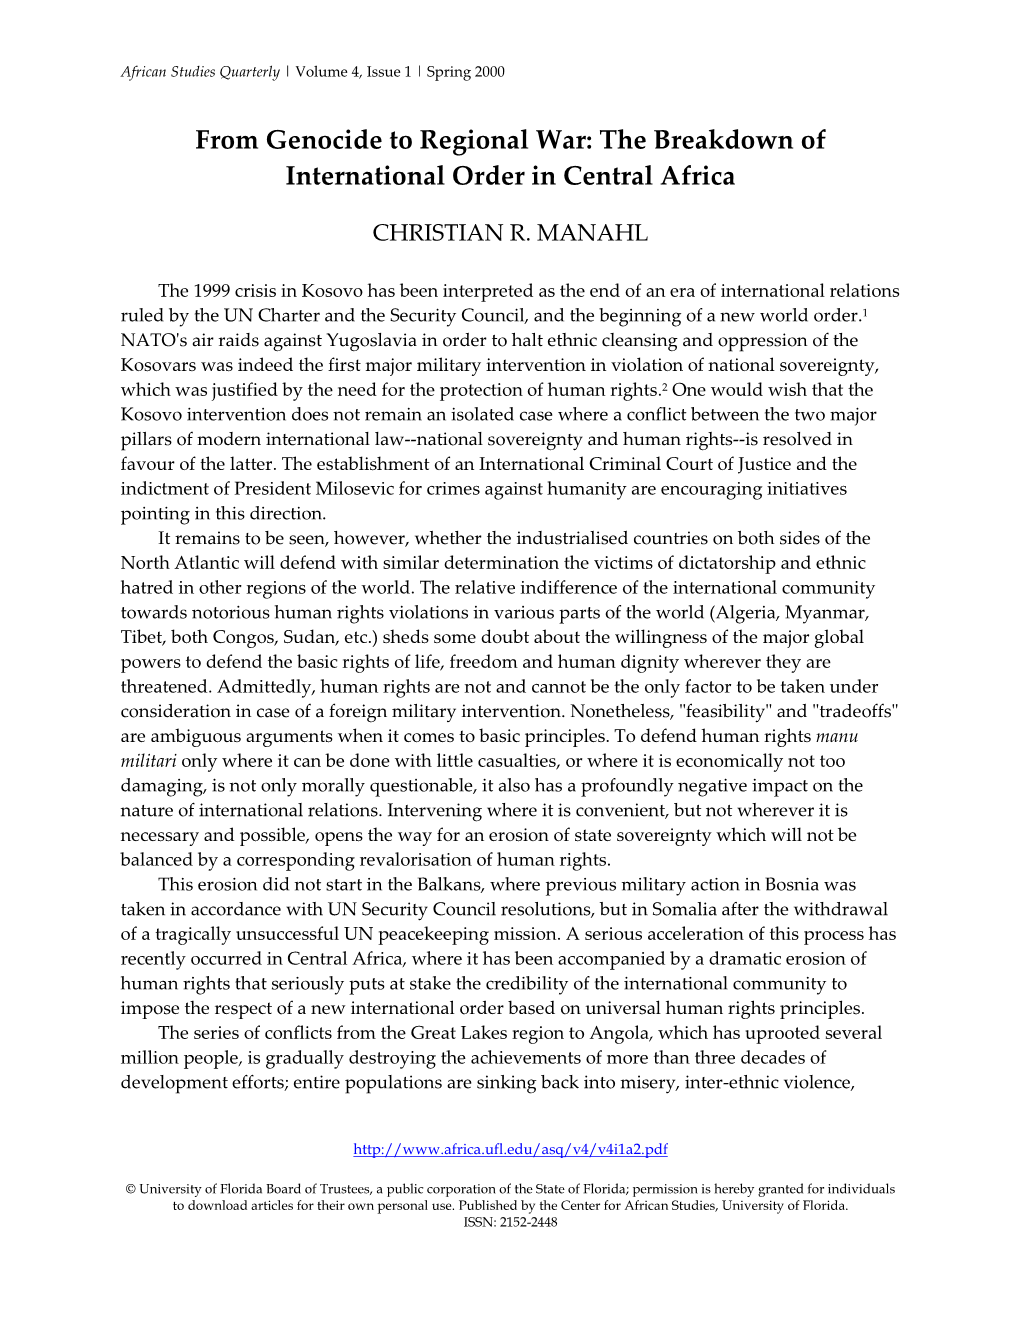 From Genocide to Regional War: the Breakdown of International Order in Central Africa